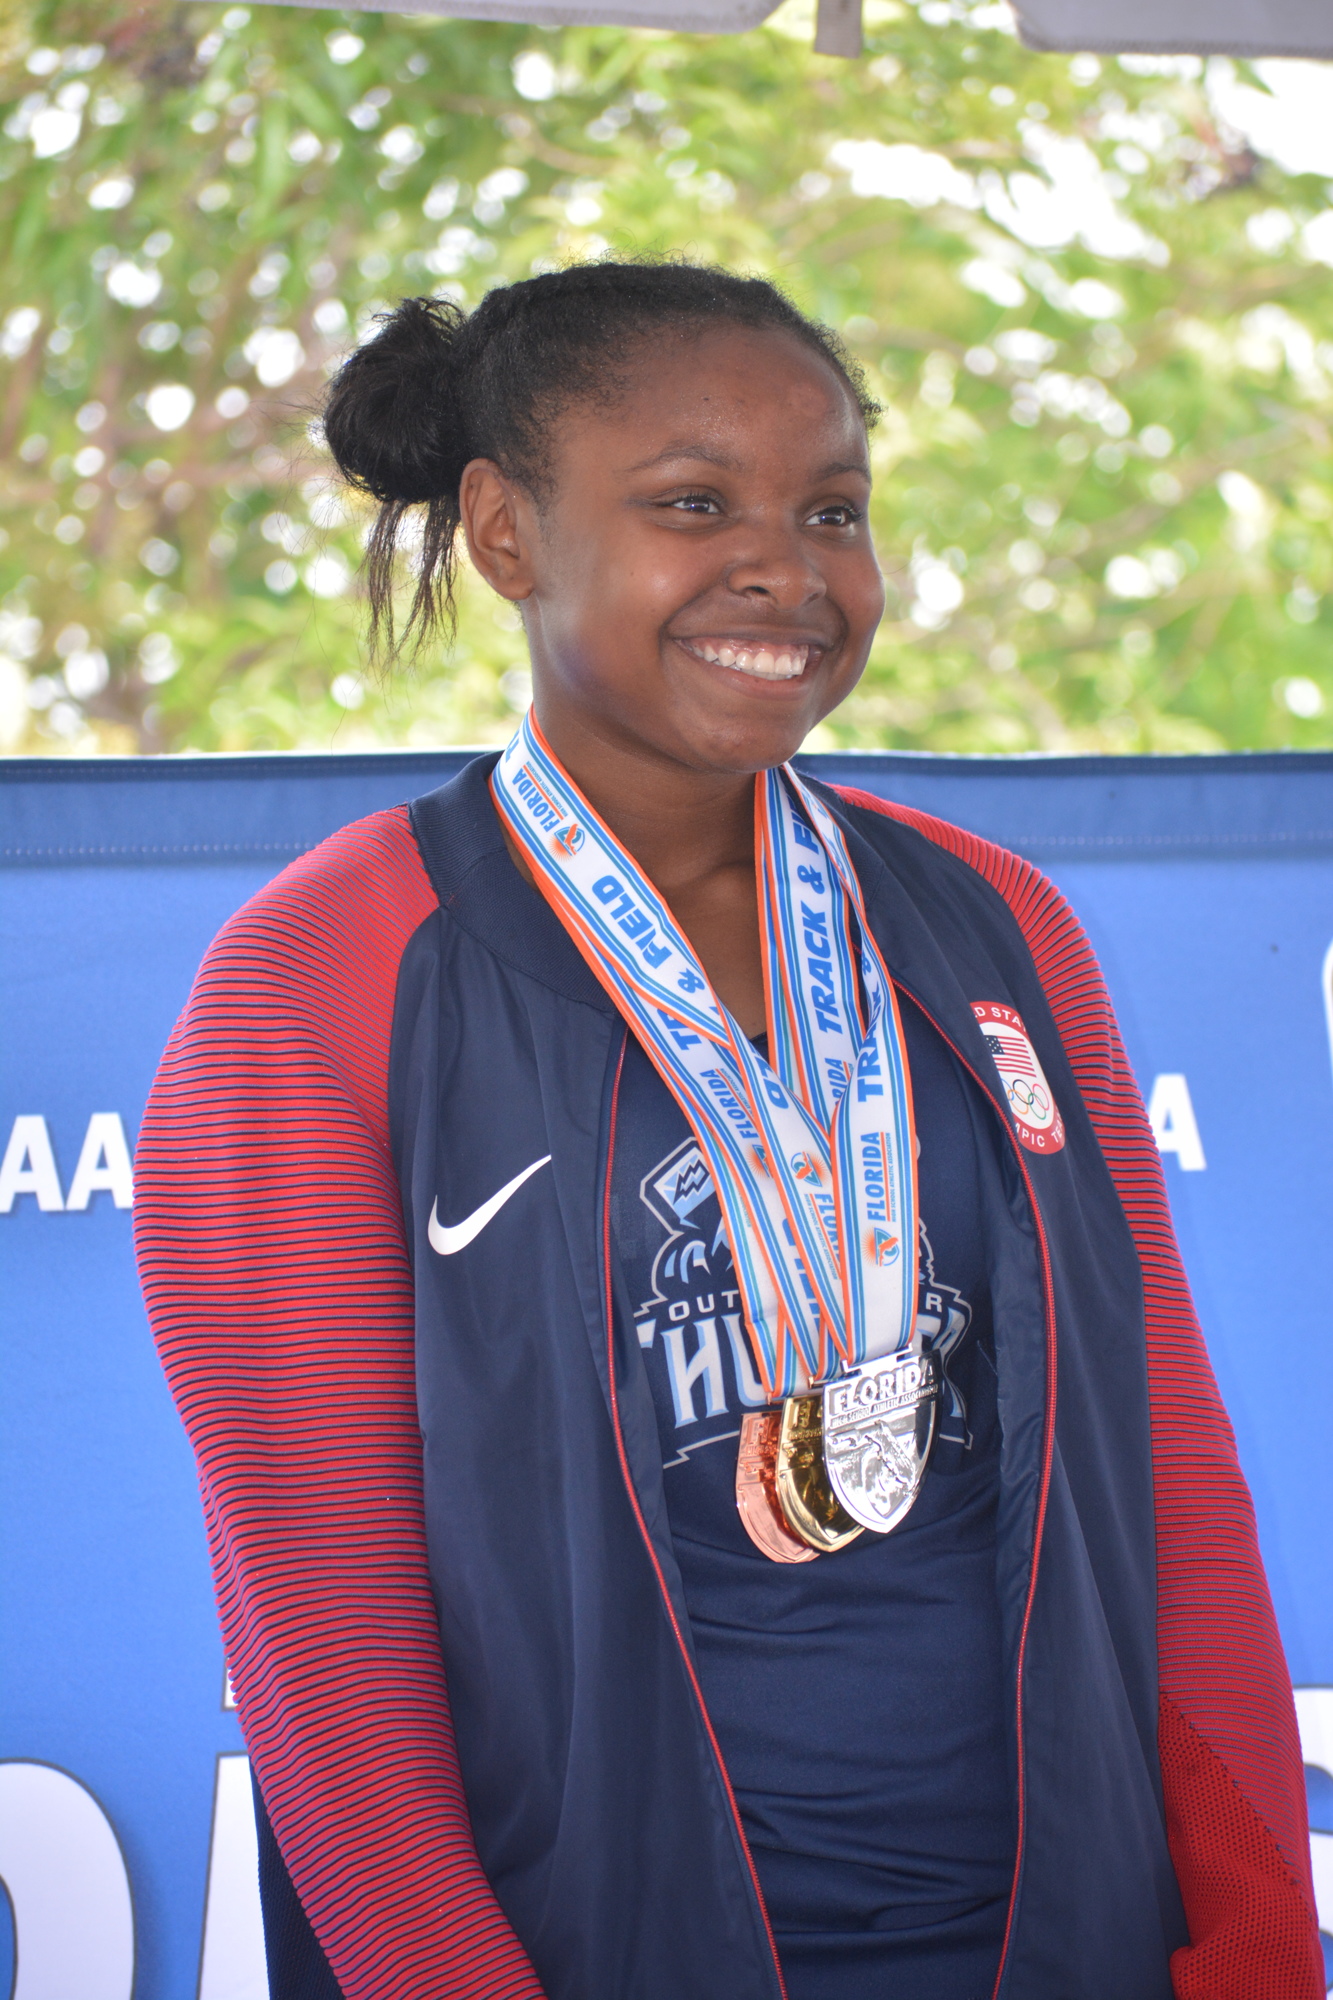 ODA freshman Saraiah Walkes relishes her gold, silver and bronze medals over a 2020 Olympics jacket.